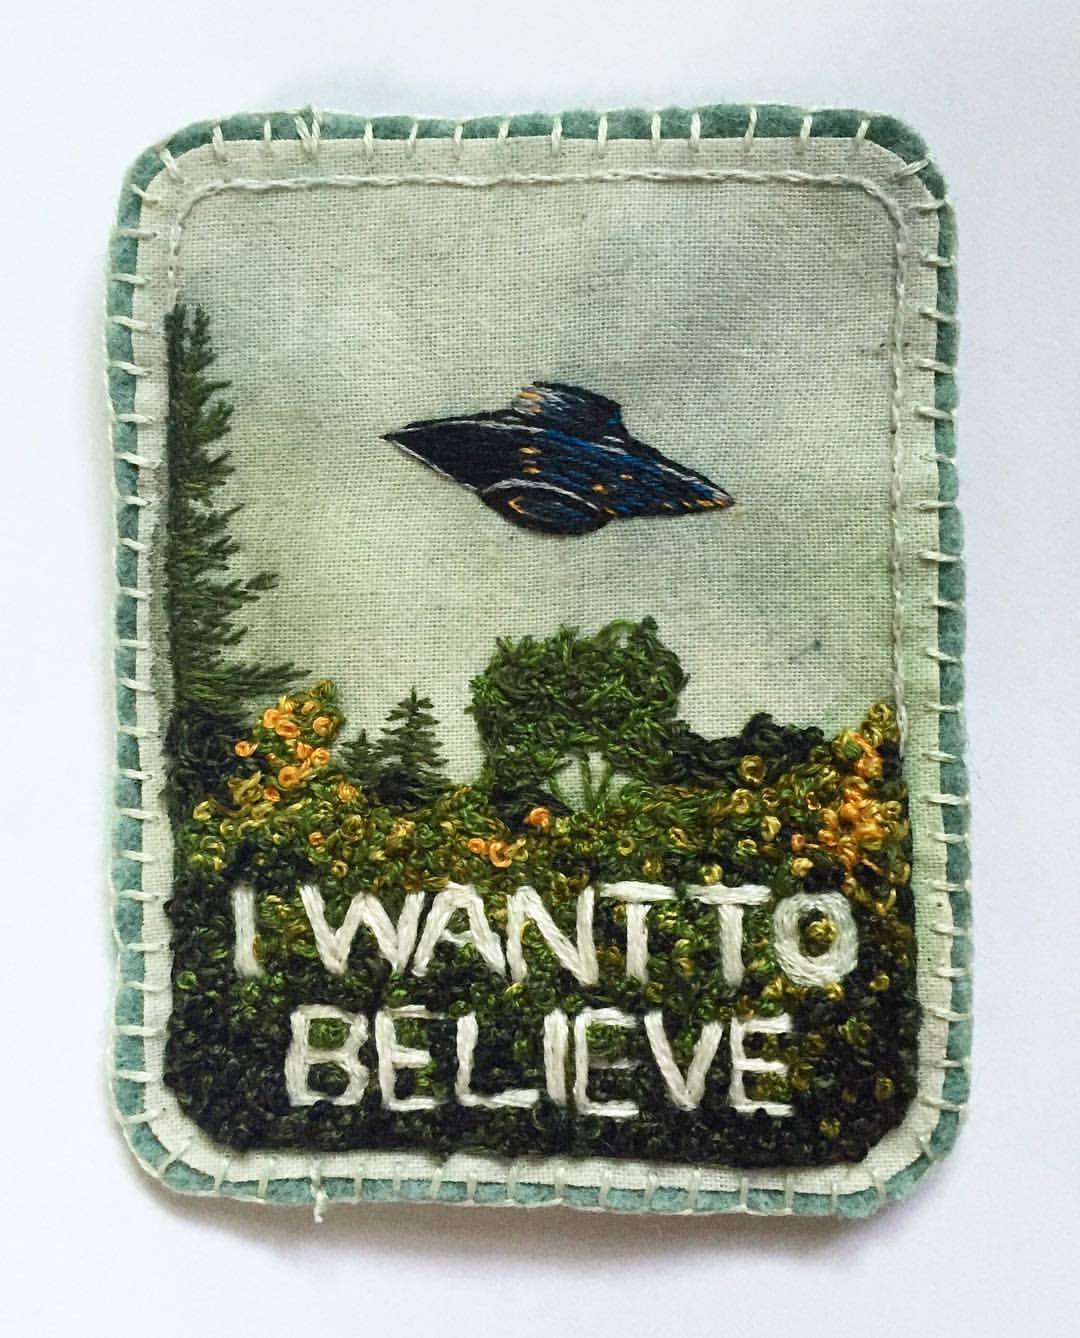 nerd-scouts:
“ I can’t tell you how obsessed I am with this badge. @sirmazbit thank you so much for commissioning this baby! It has been challenging and fun and turned out absolutely beauuuuutiful!! ✨💚👽✨👽💚✨ #nerdscouts #iwanttobelieve #handmade...